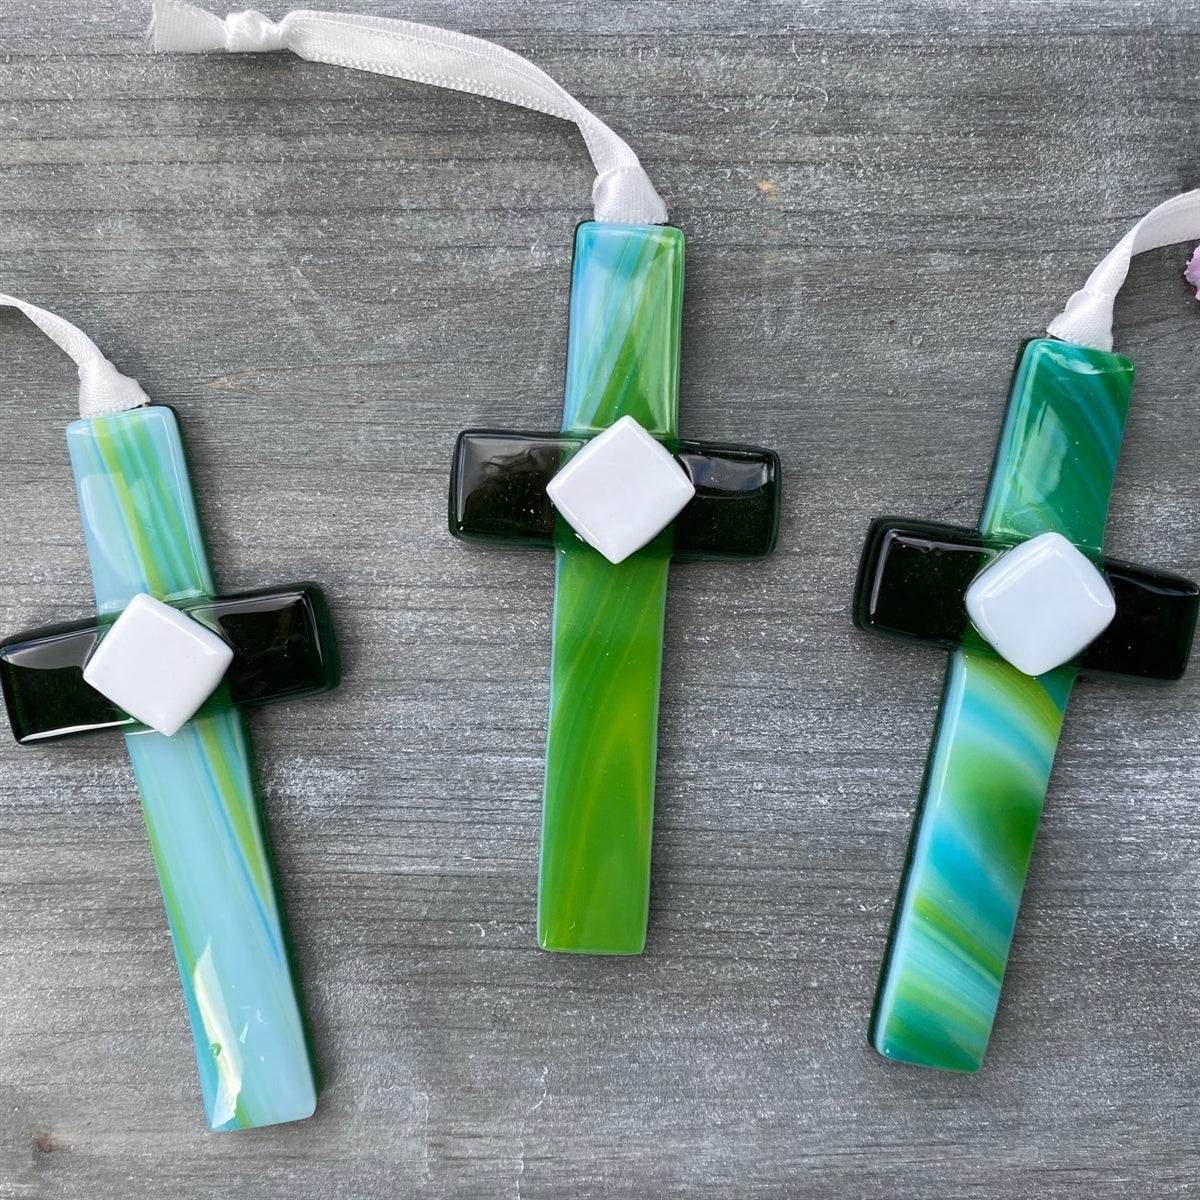 An assortment of green glass crosses with swirls of green and blue.